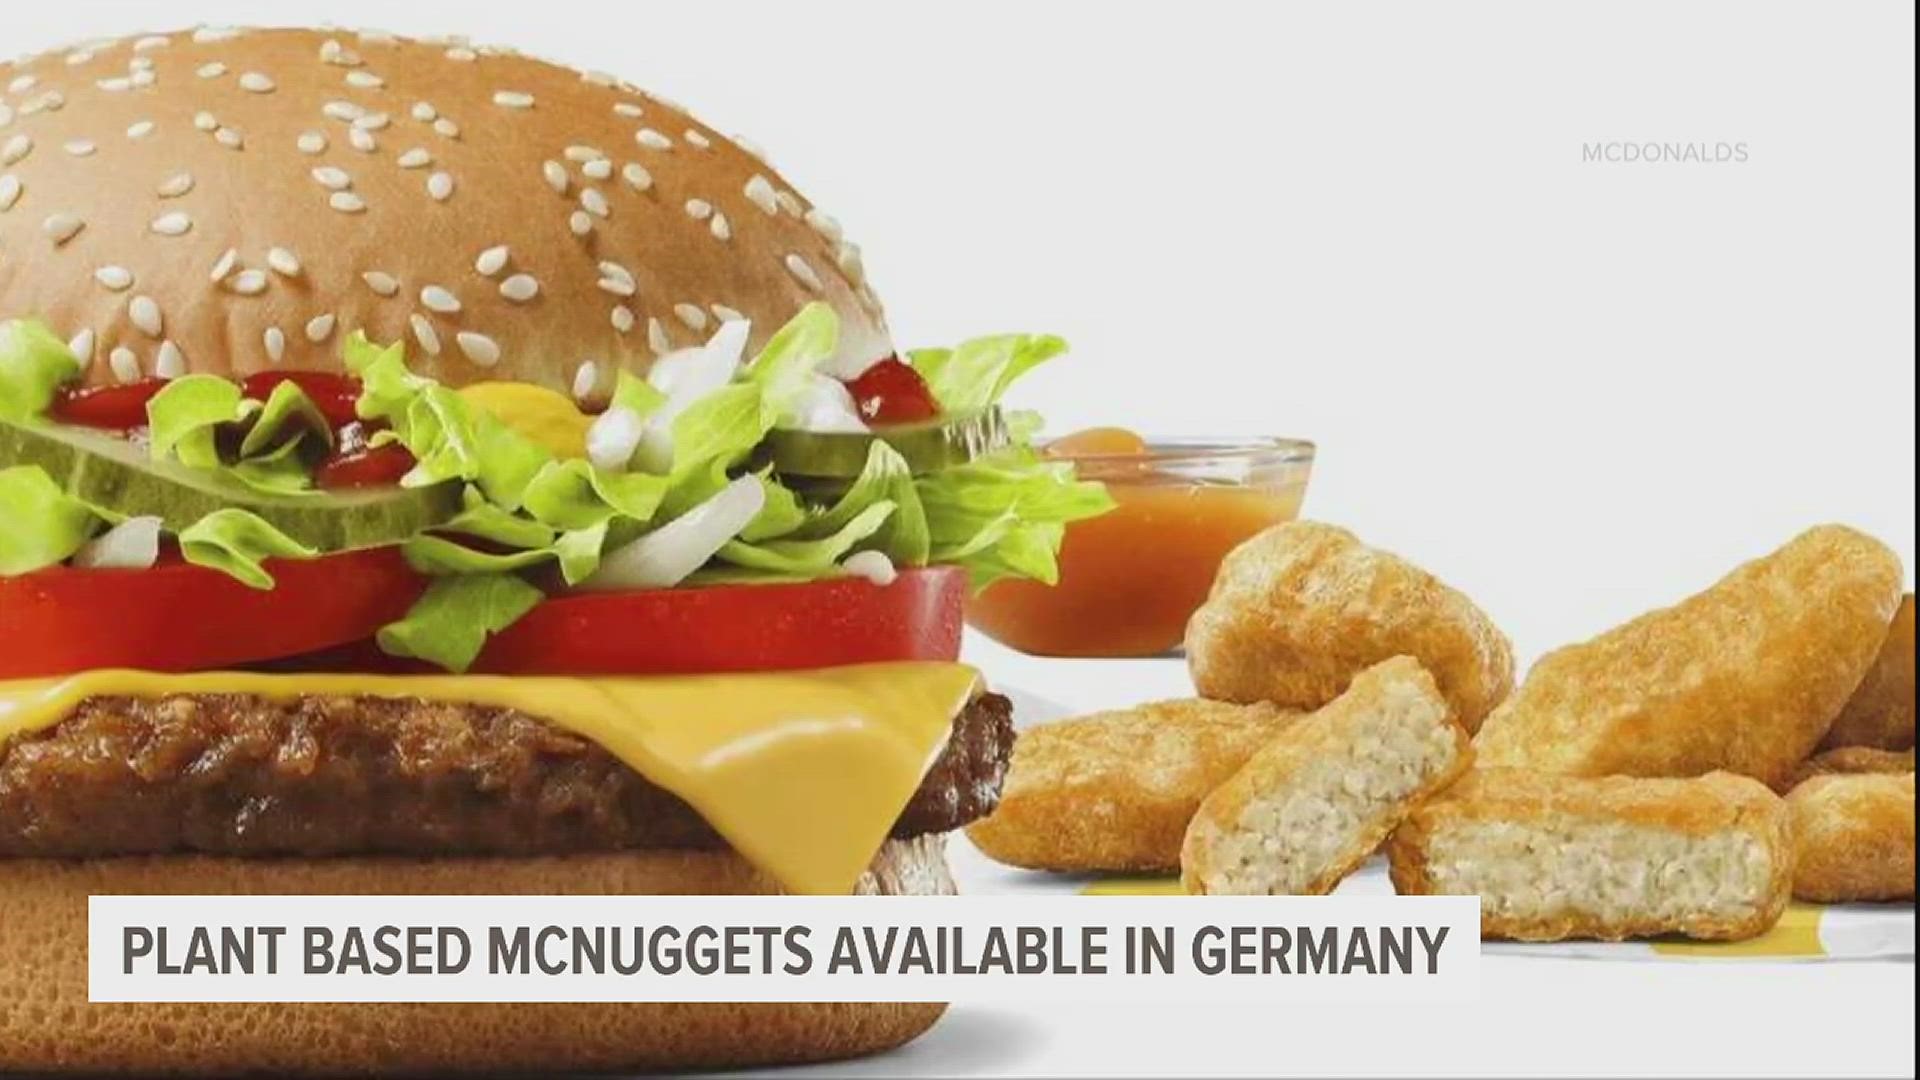 The plant-based McNuggets, co-developed with Beyond Meat, will soon be available at more than 1,400 McDonald's locations.